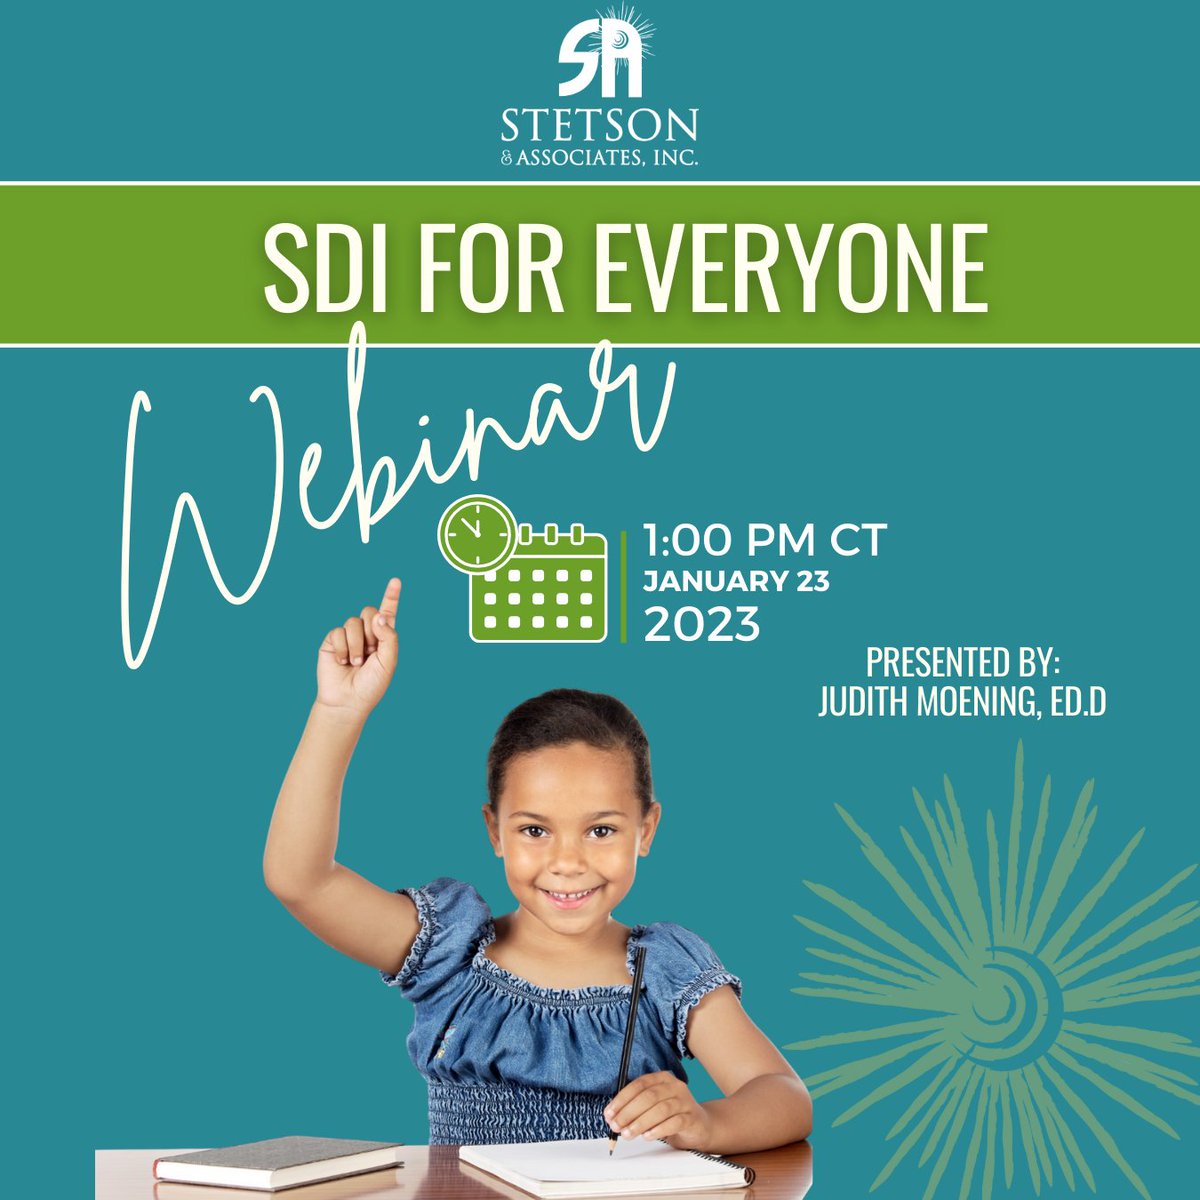 ⏰ Don't forget- webinar is tomorrow at 1 PM CST! Forget to register? Don't worry, there's still time: ow.ly/1U7L50QsJNo We'll save you a seat! 🙌